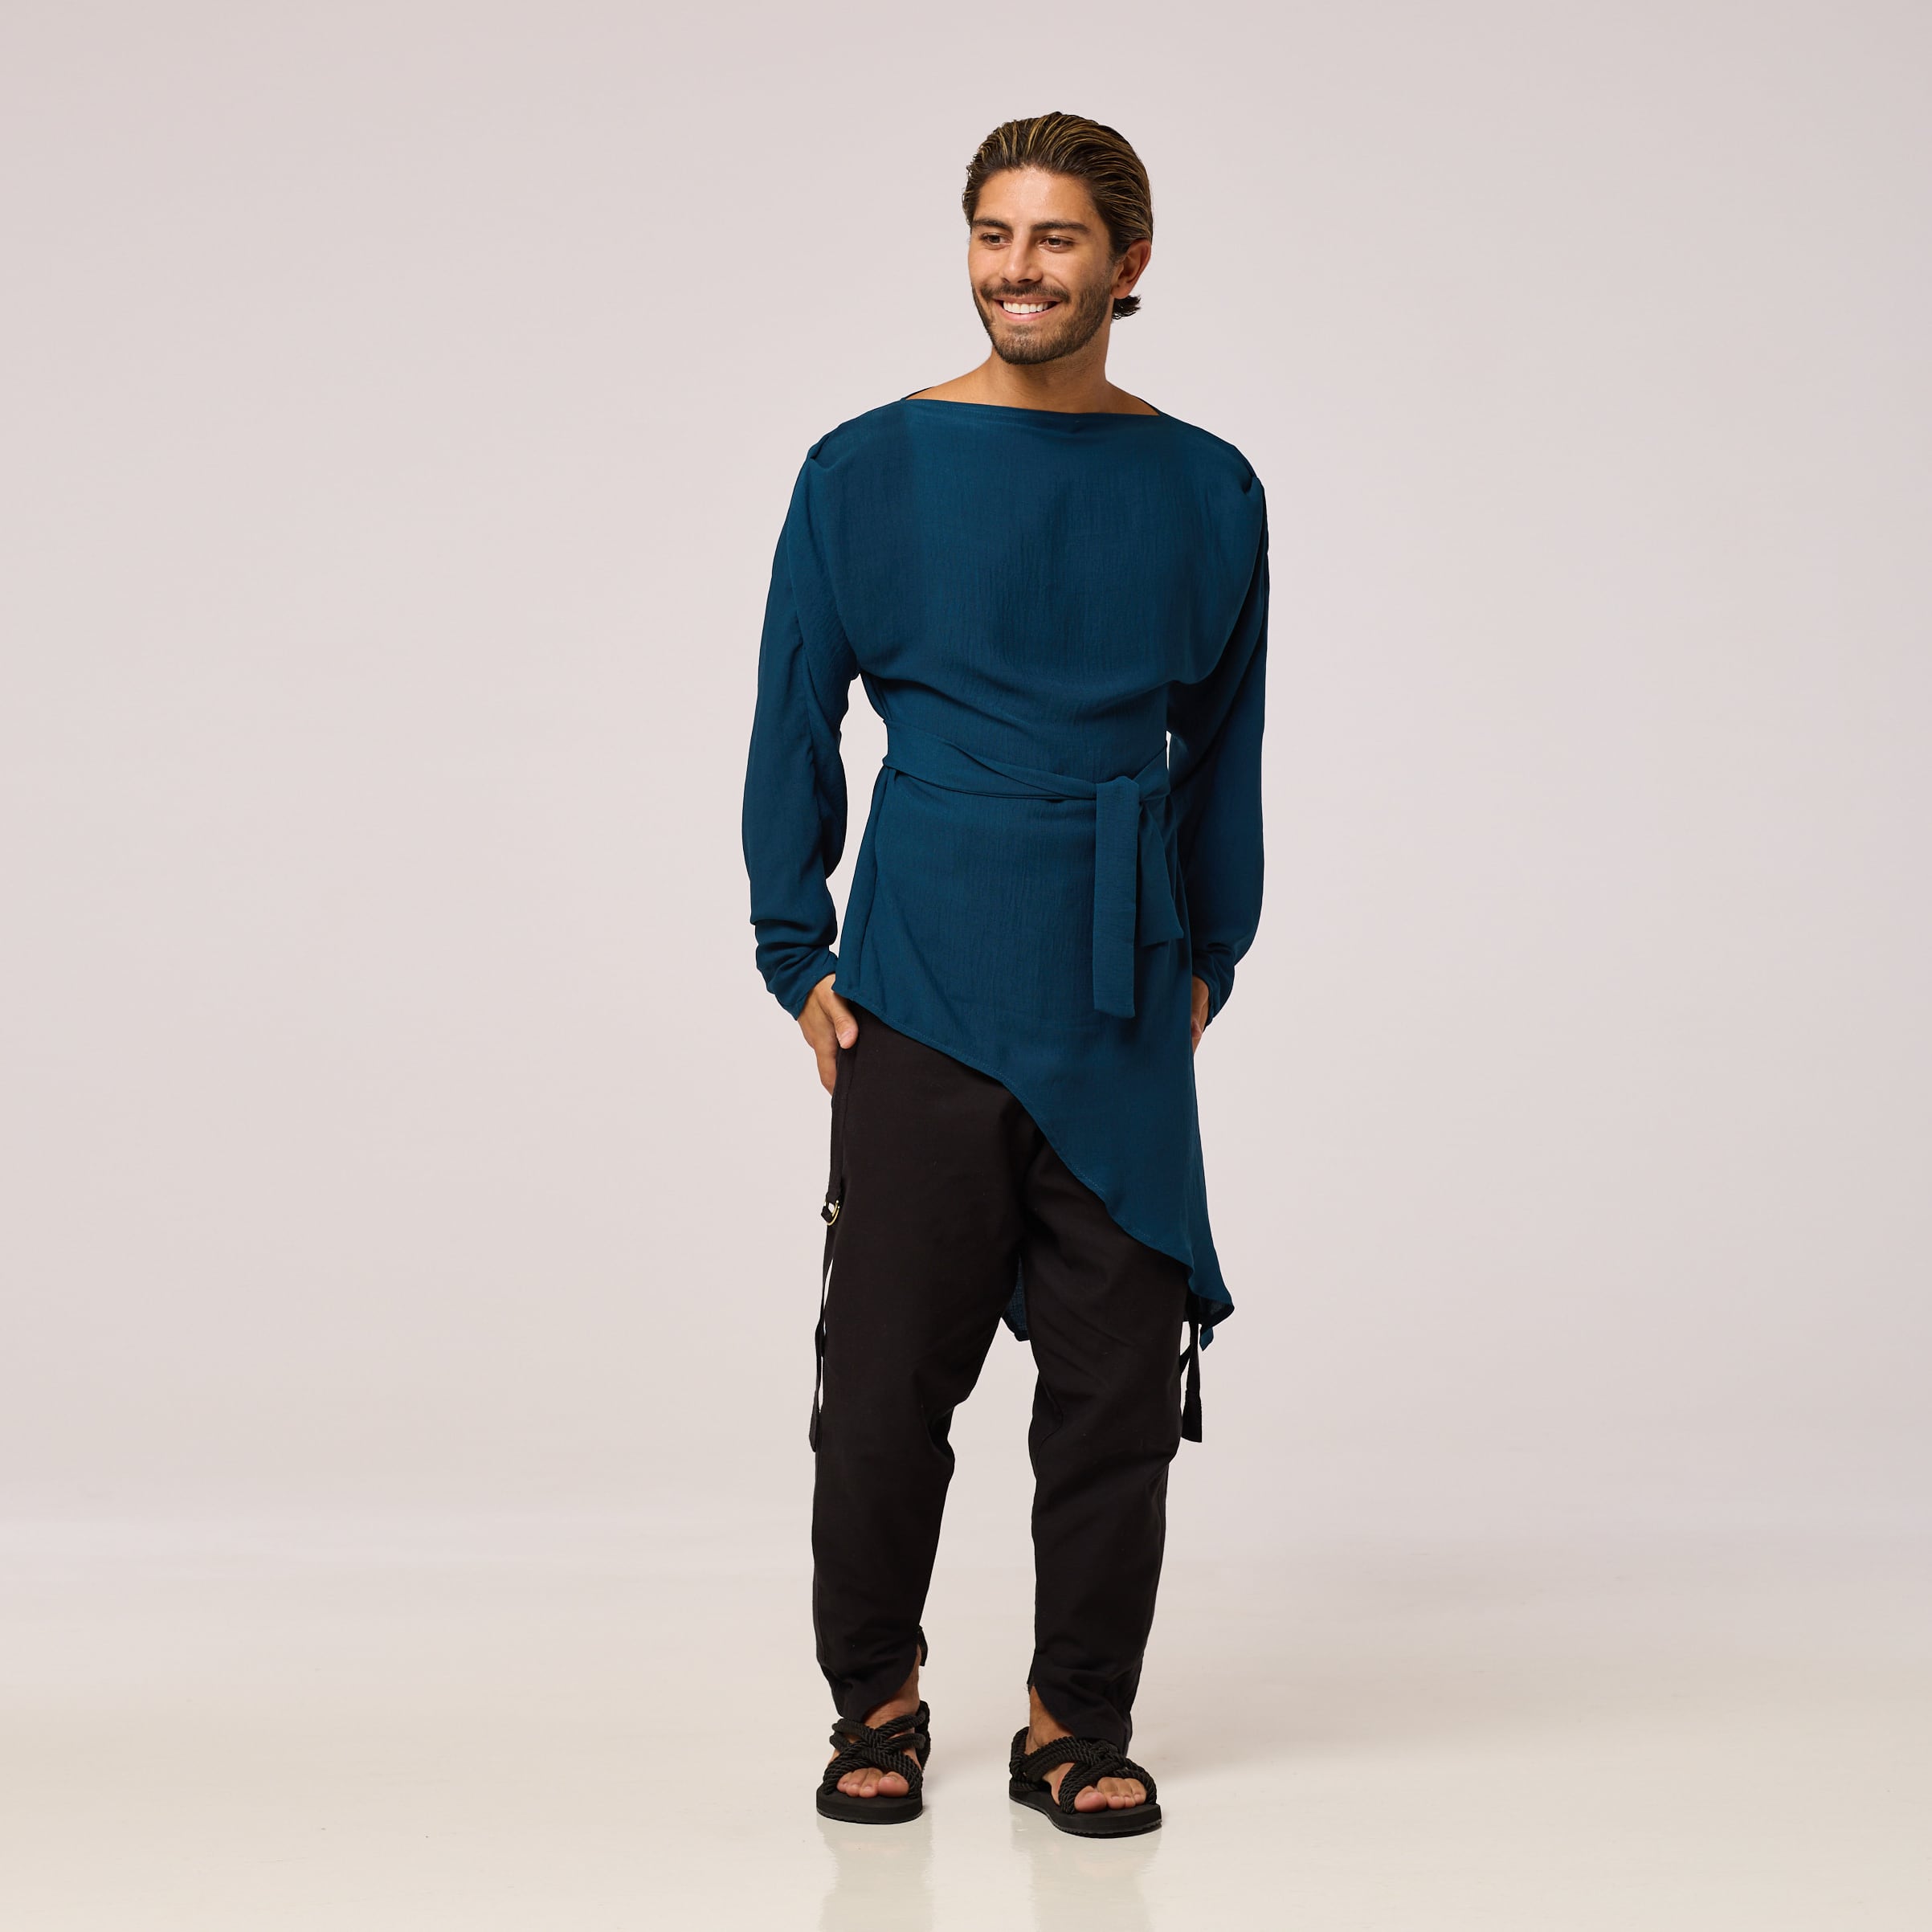 ZERØ London - Front view, mens zero waste long sleeve high/low shirt with bateau neck in teal blue, designed & made in London